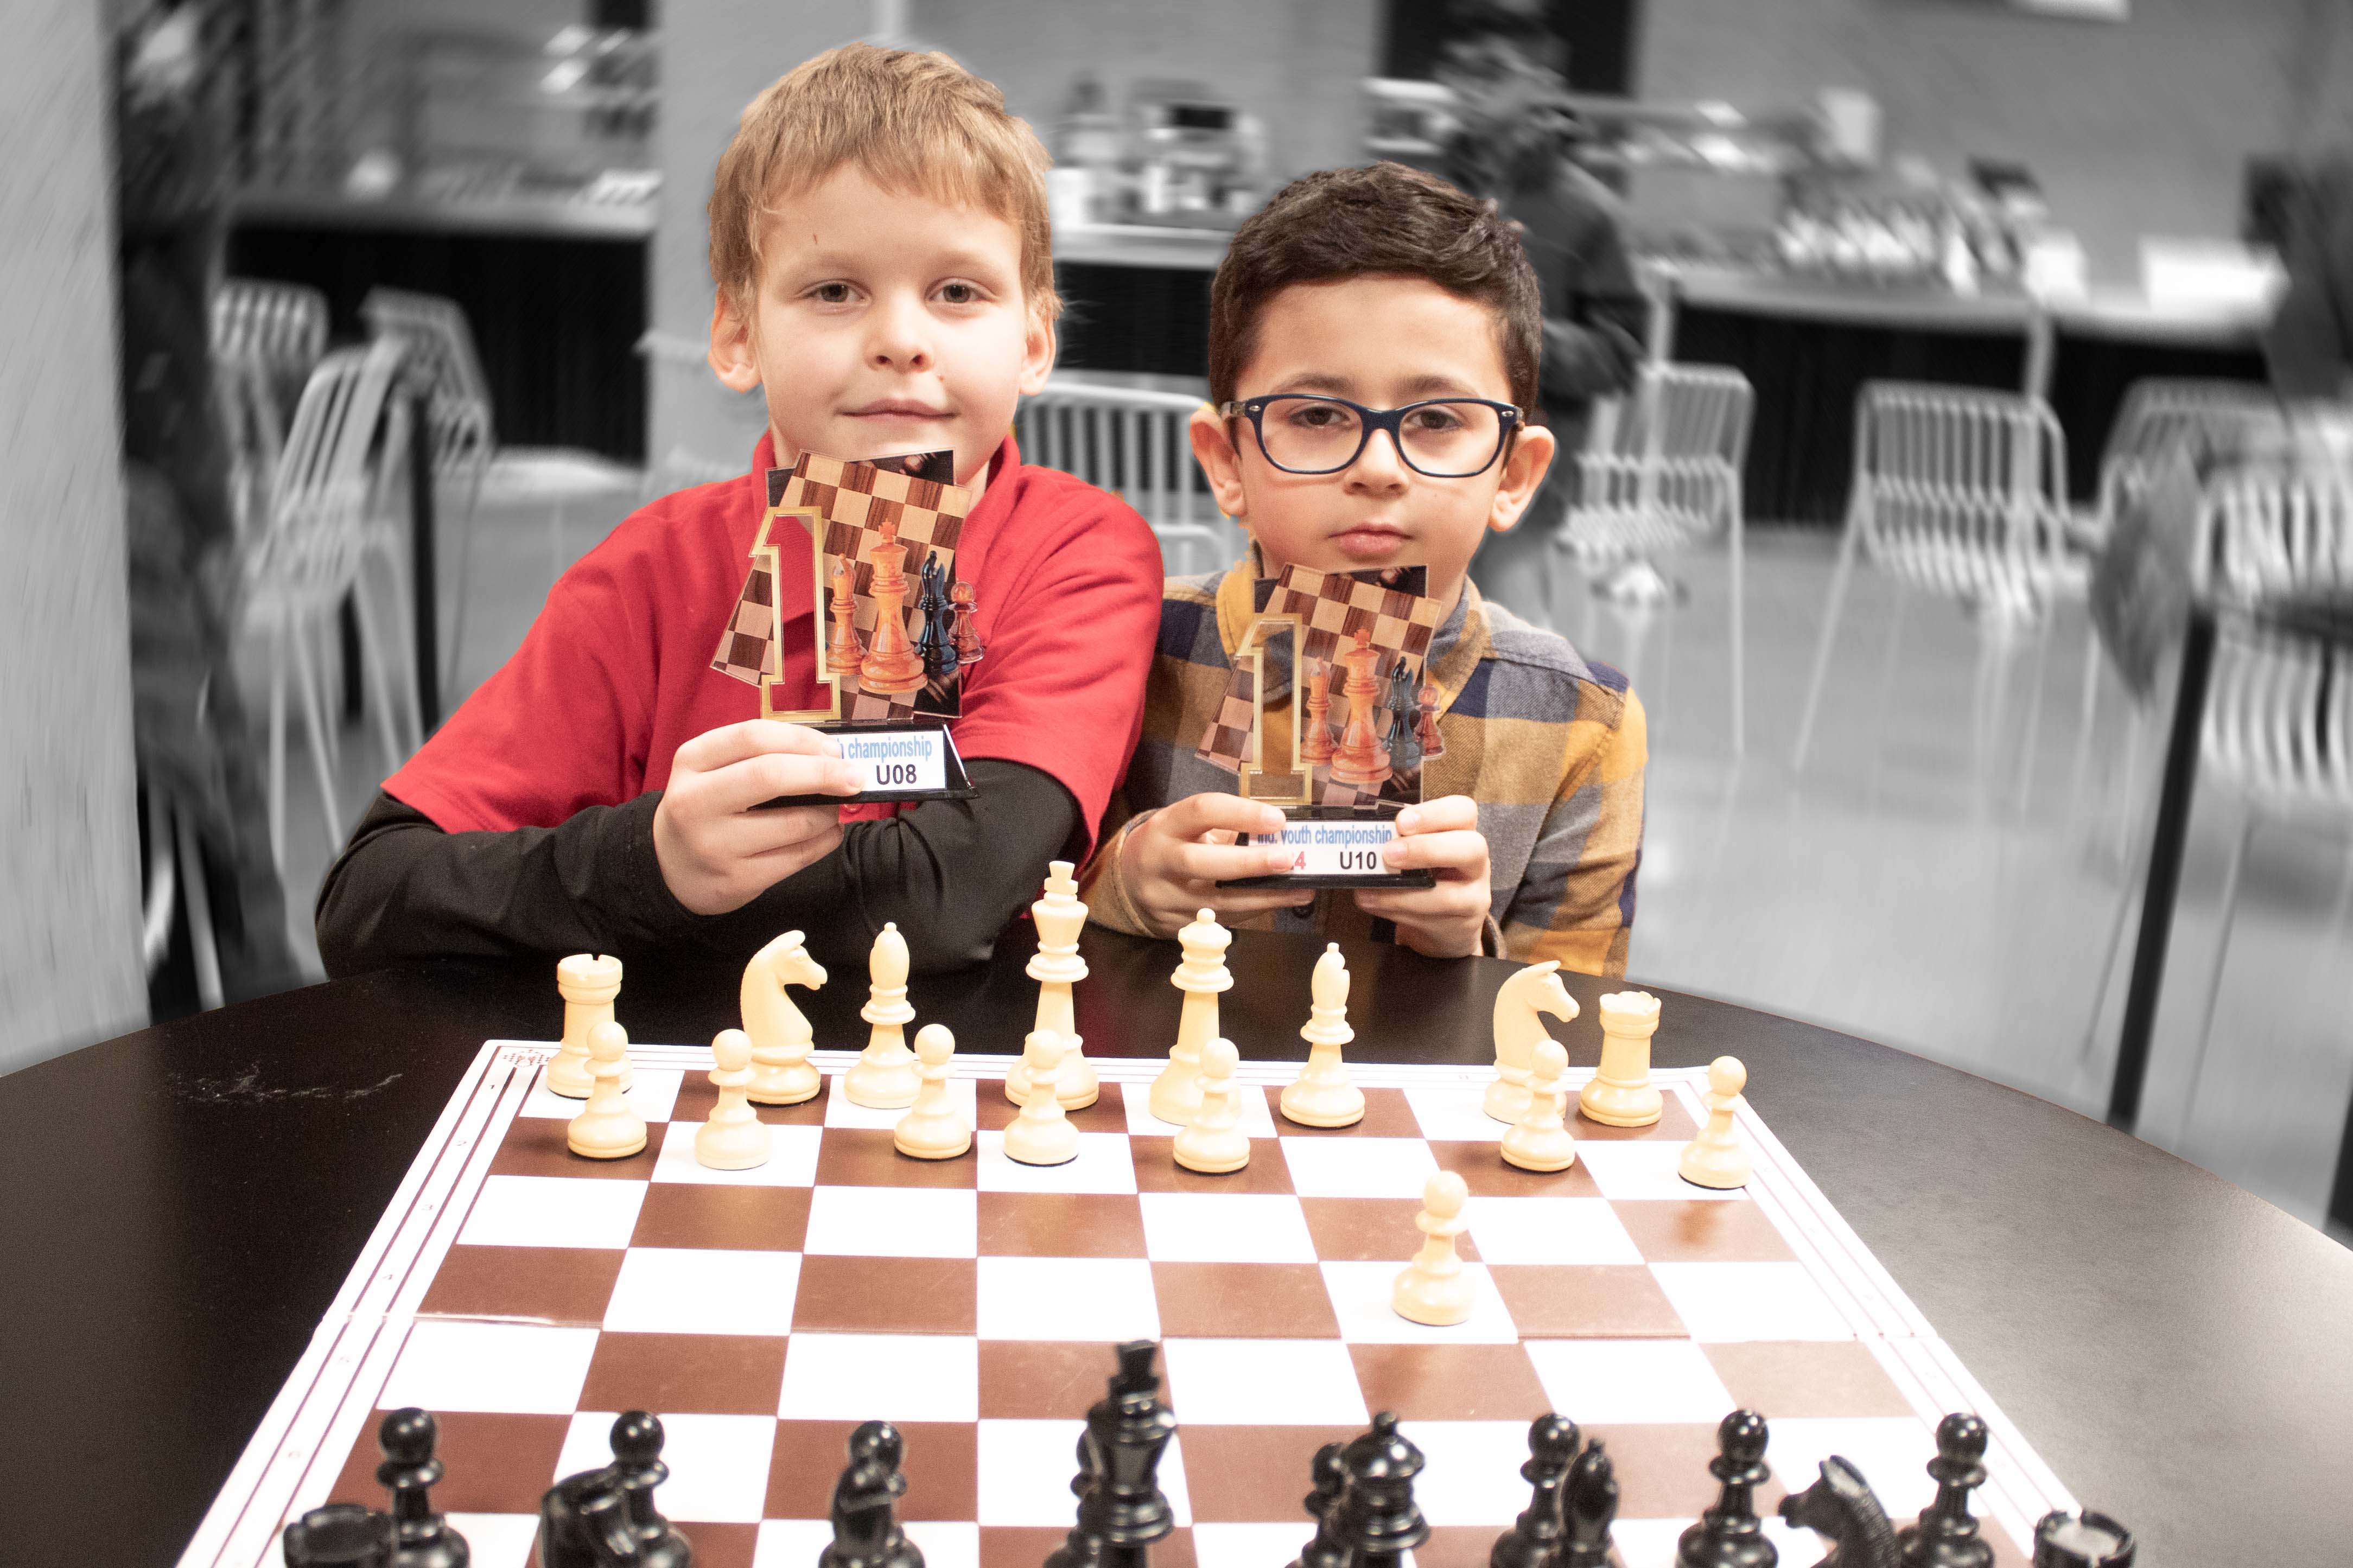 Two Lion Kings are Dominating the Chess Realm